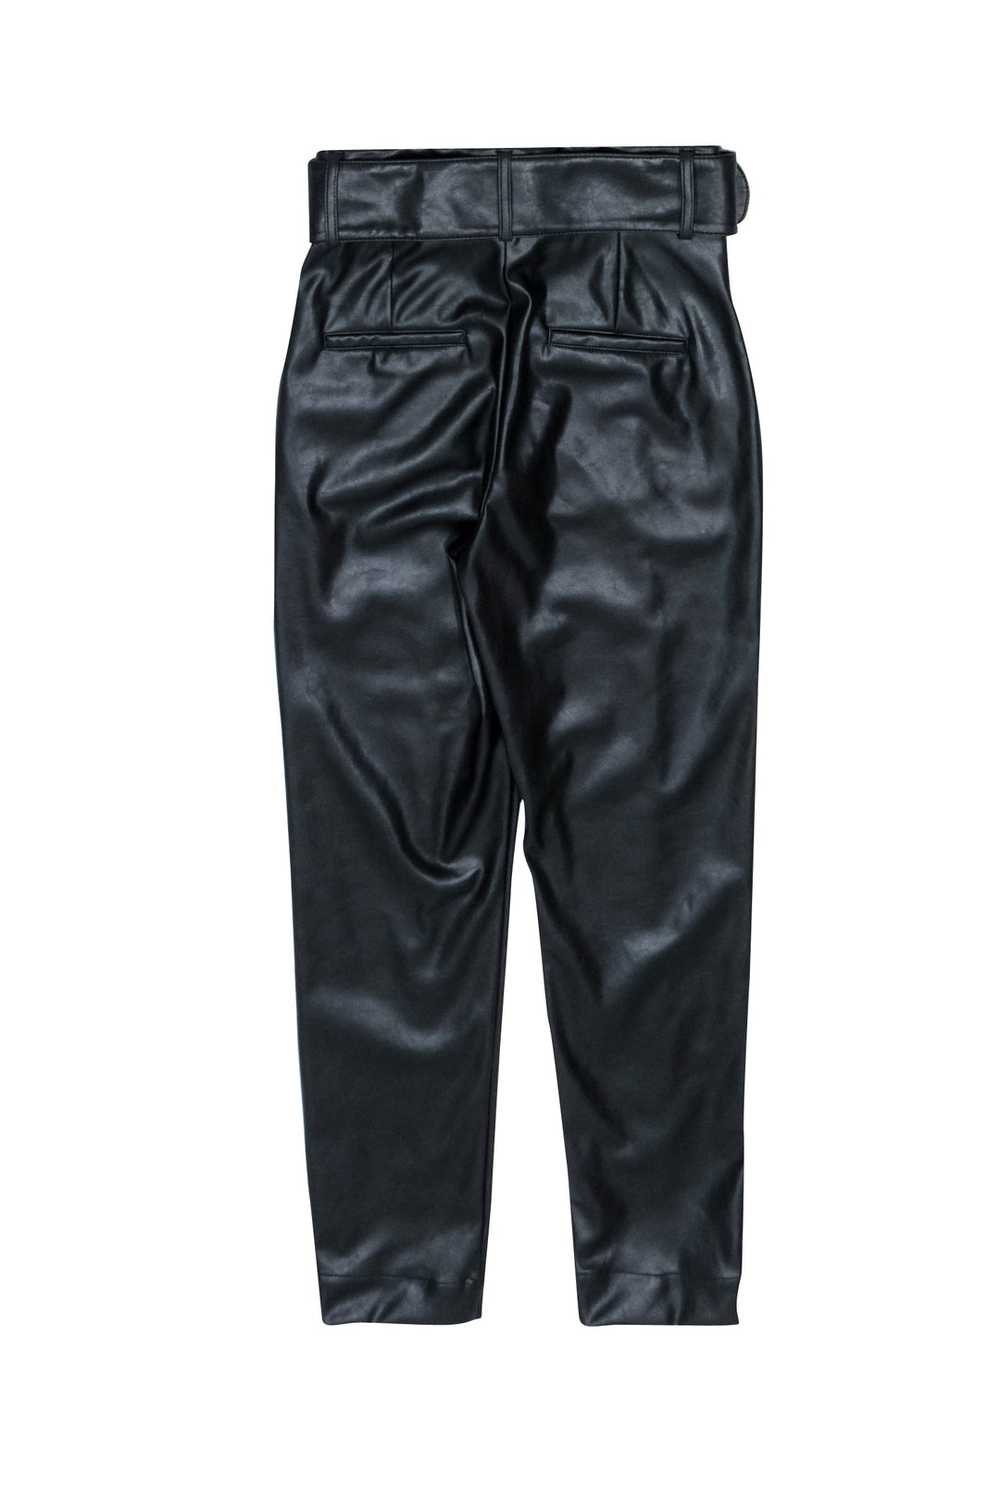 The Kooples - Black Faux Leather Belted Pants Sz S - image 2